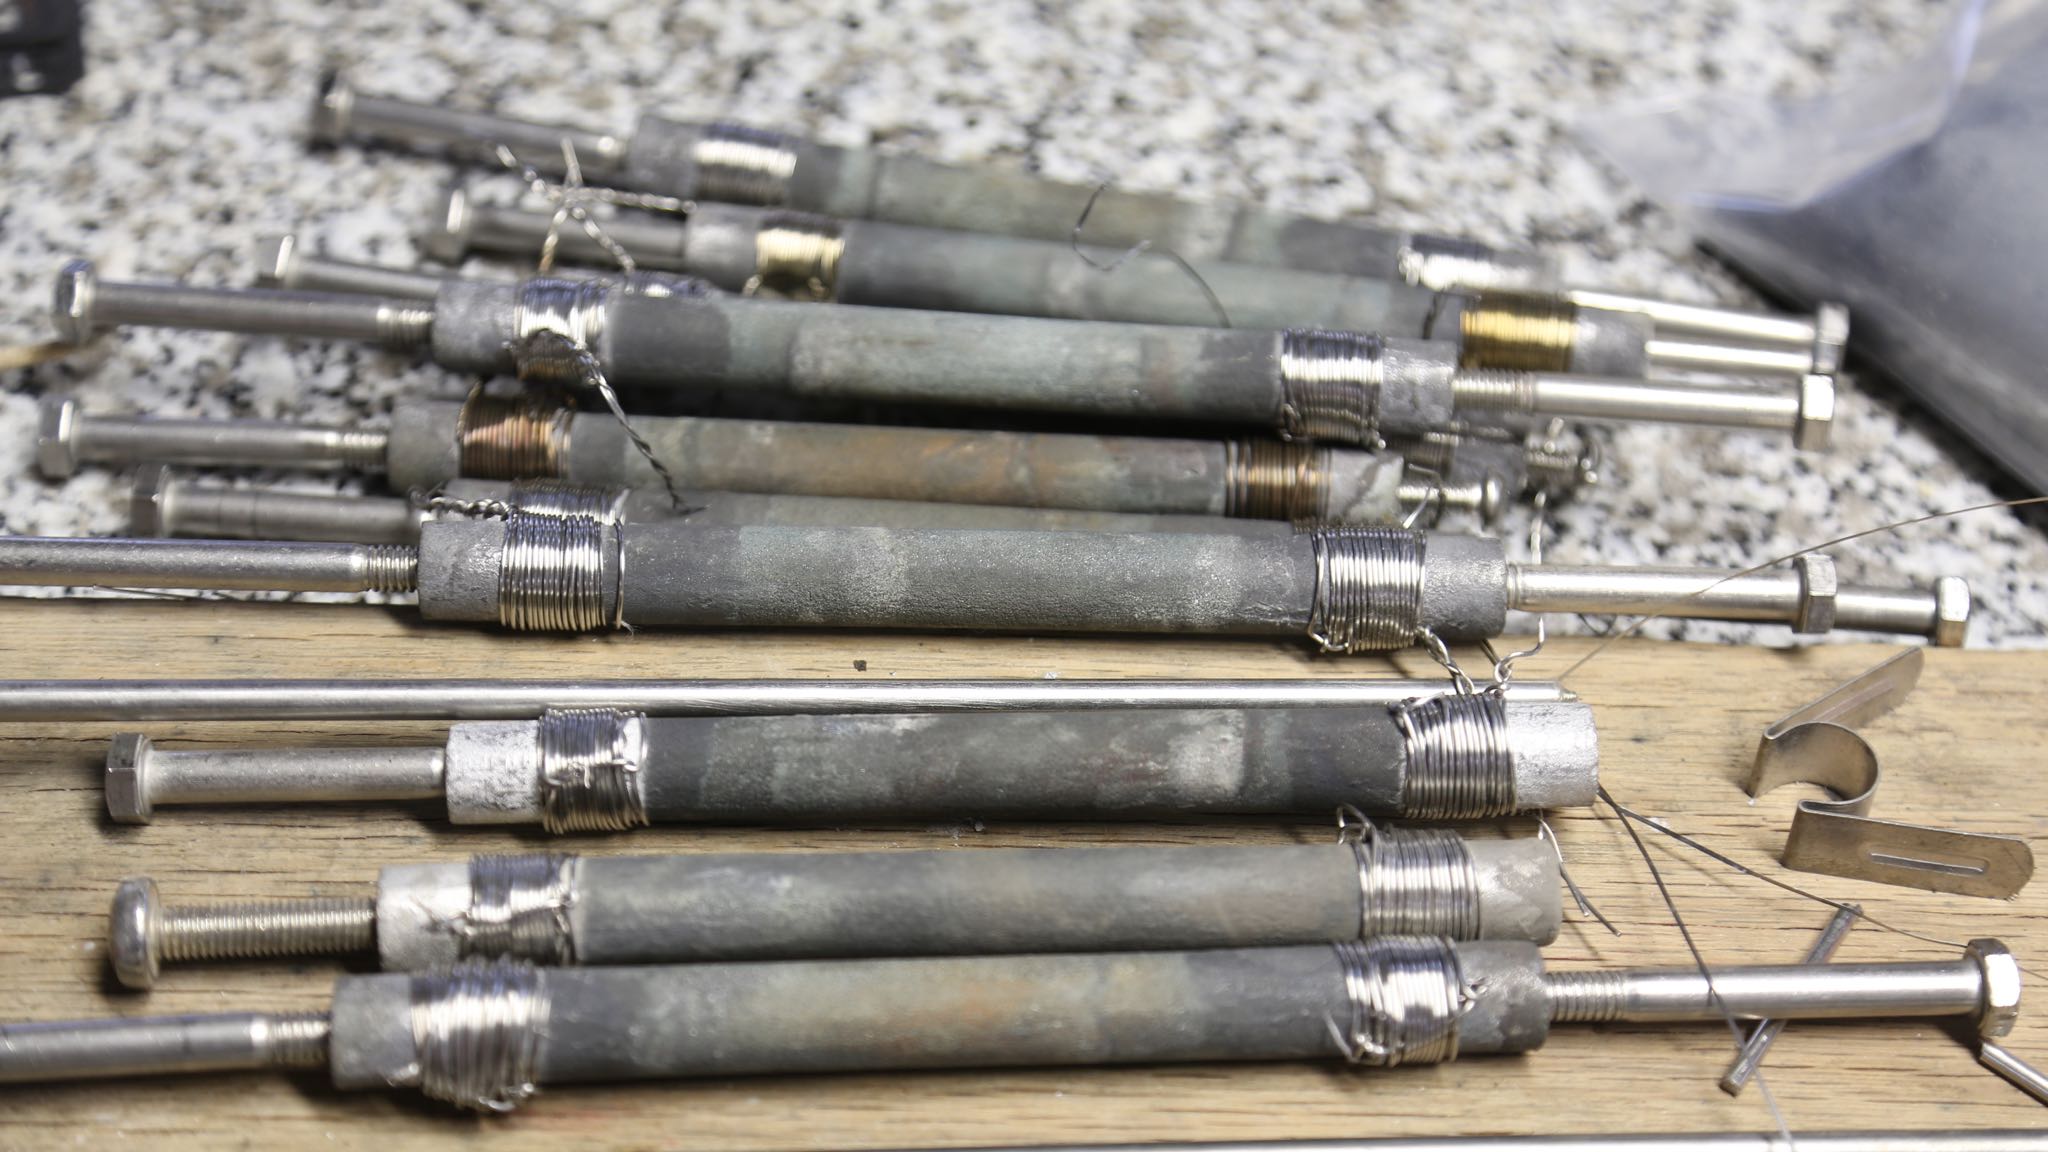 Lots of stainless steel bolts to cut, mill, drill and connect. We also used over 30 yards of stainless steel to "reinforce" the cold ends (the better the cold ends conduct the less heat they produce).